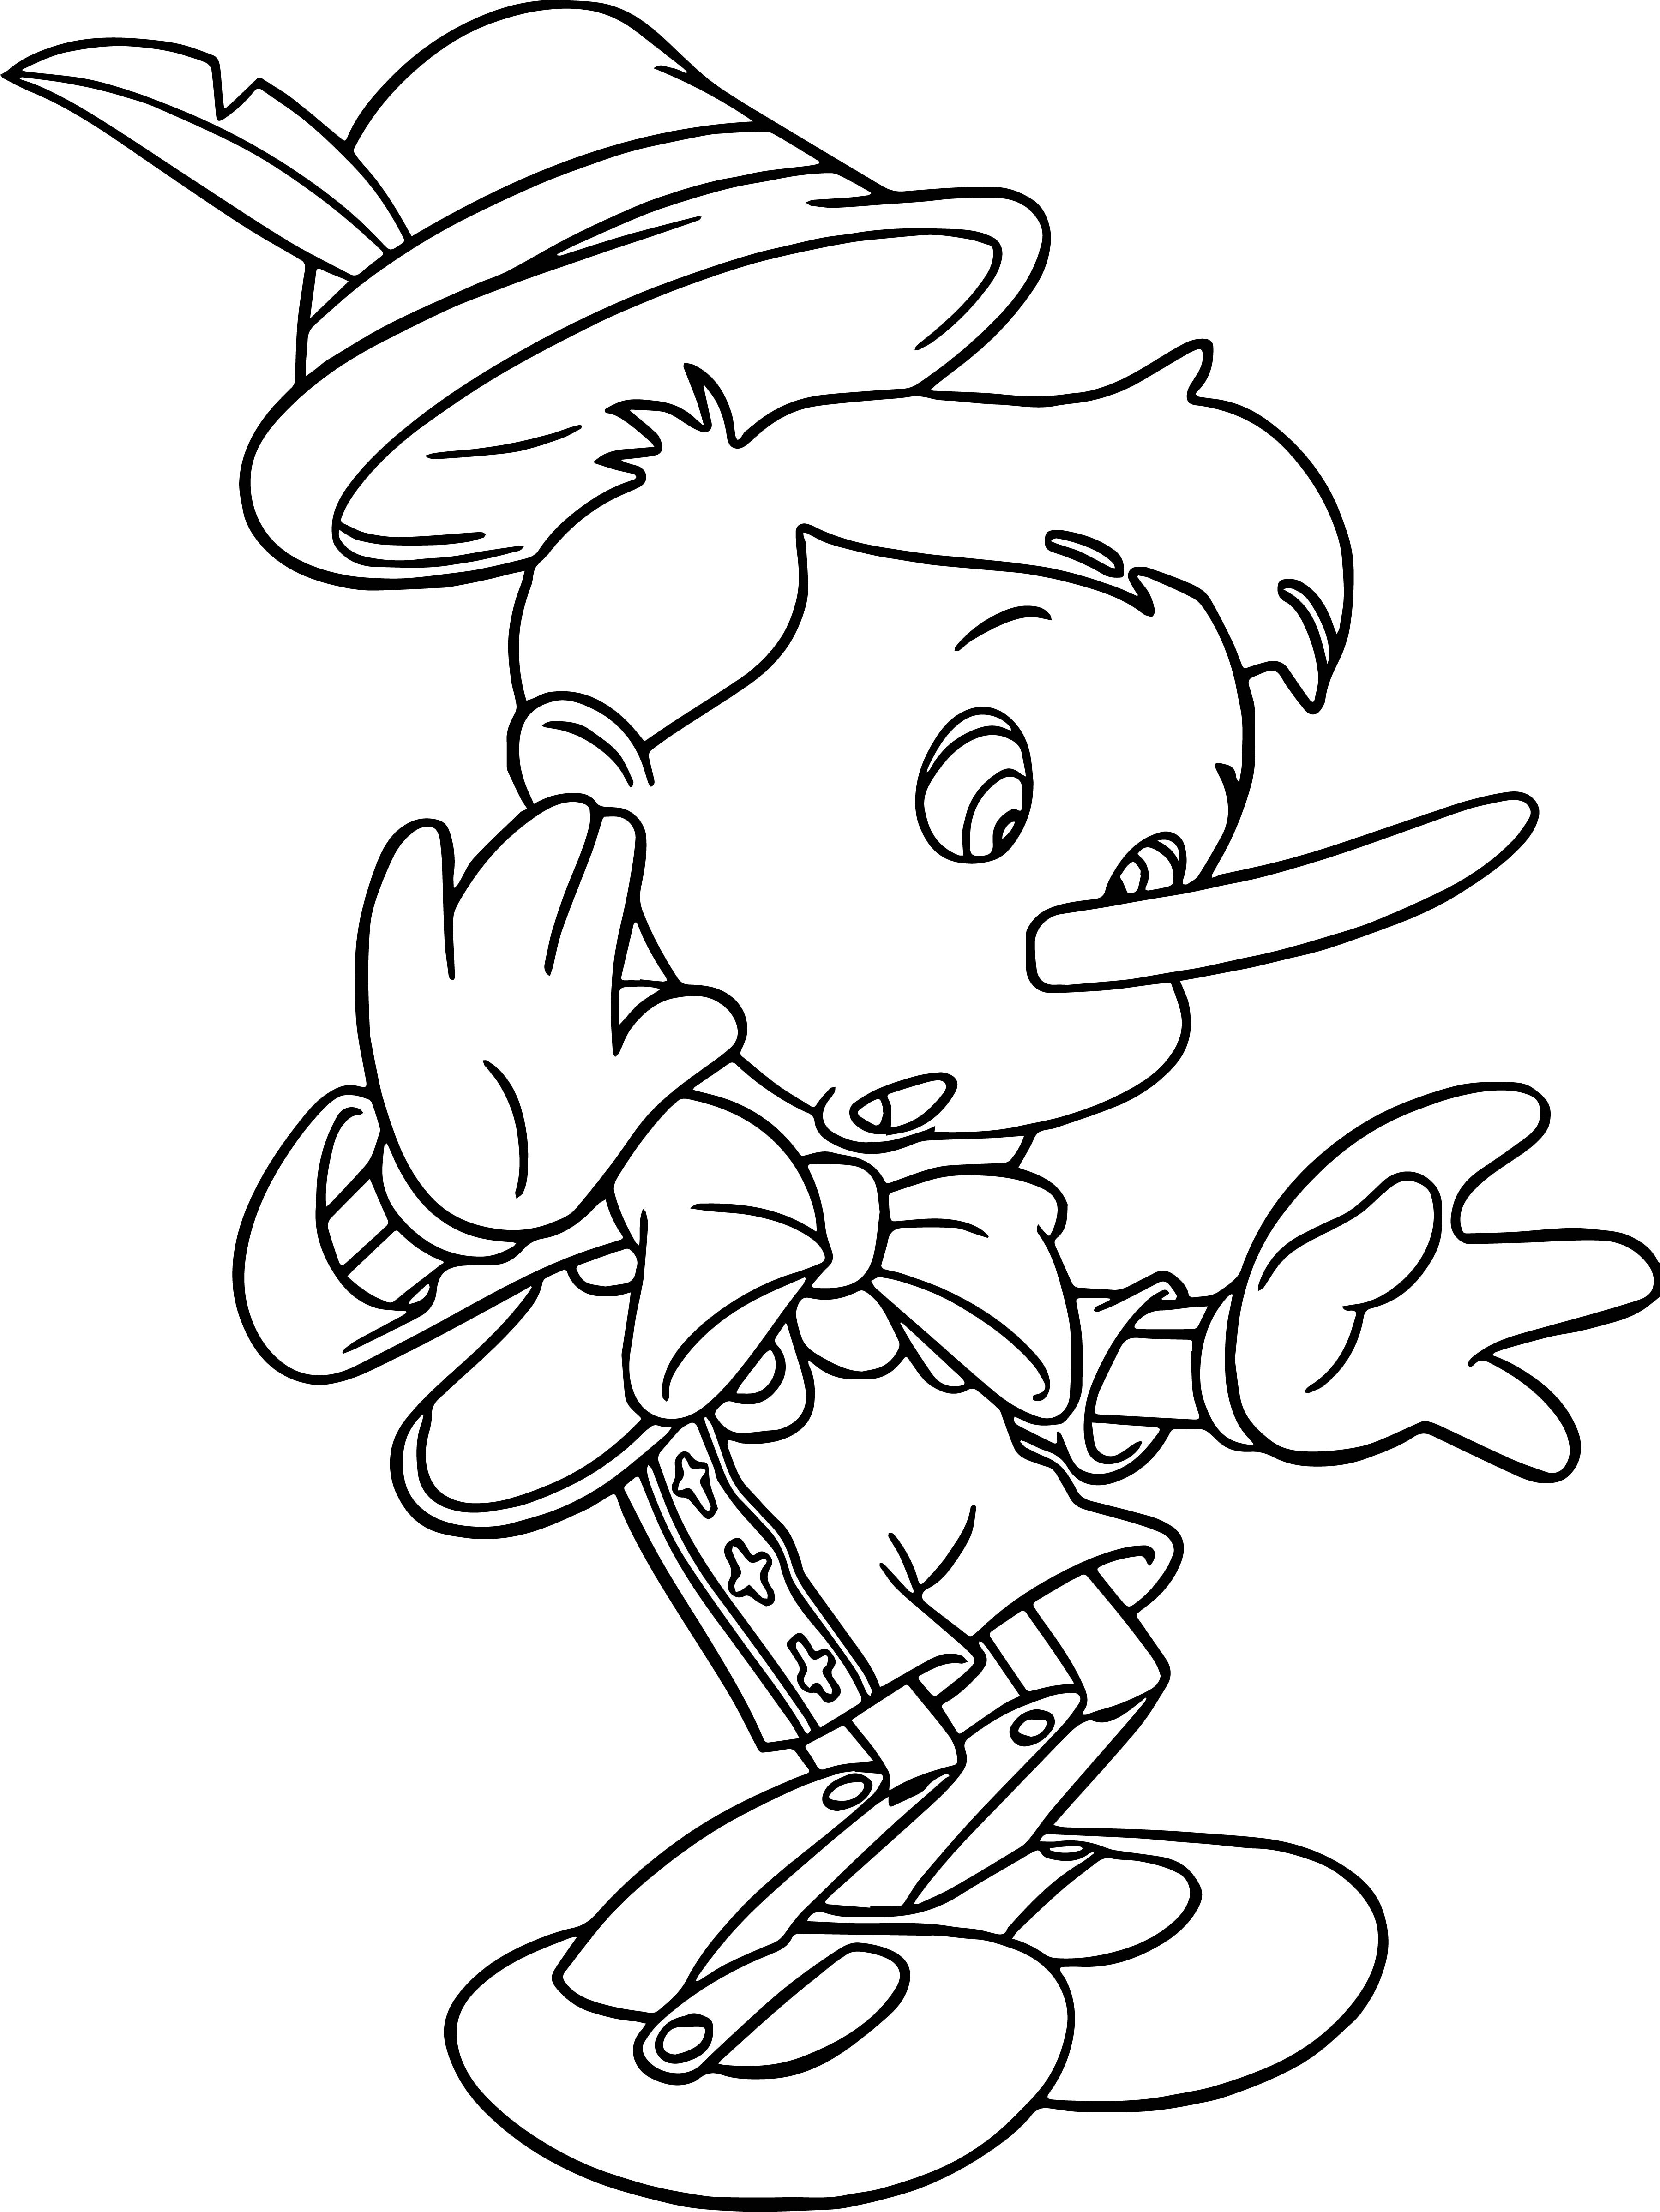 Pinocchio Coloring Page Pinocchio Surprised Coloring Pages Wecoloringpage